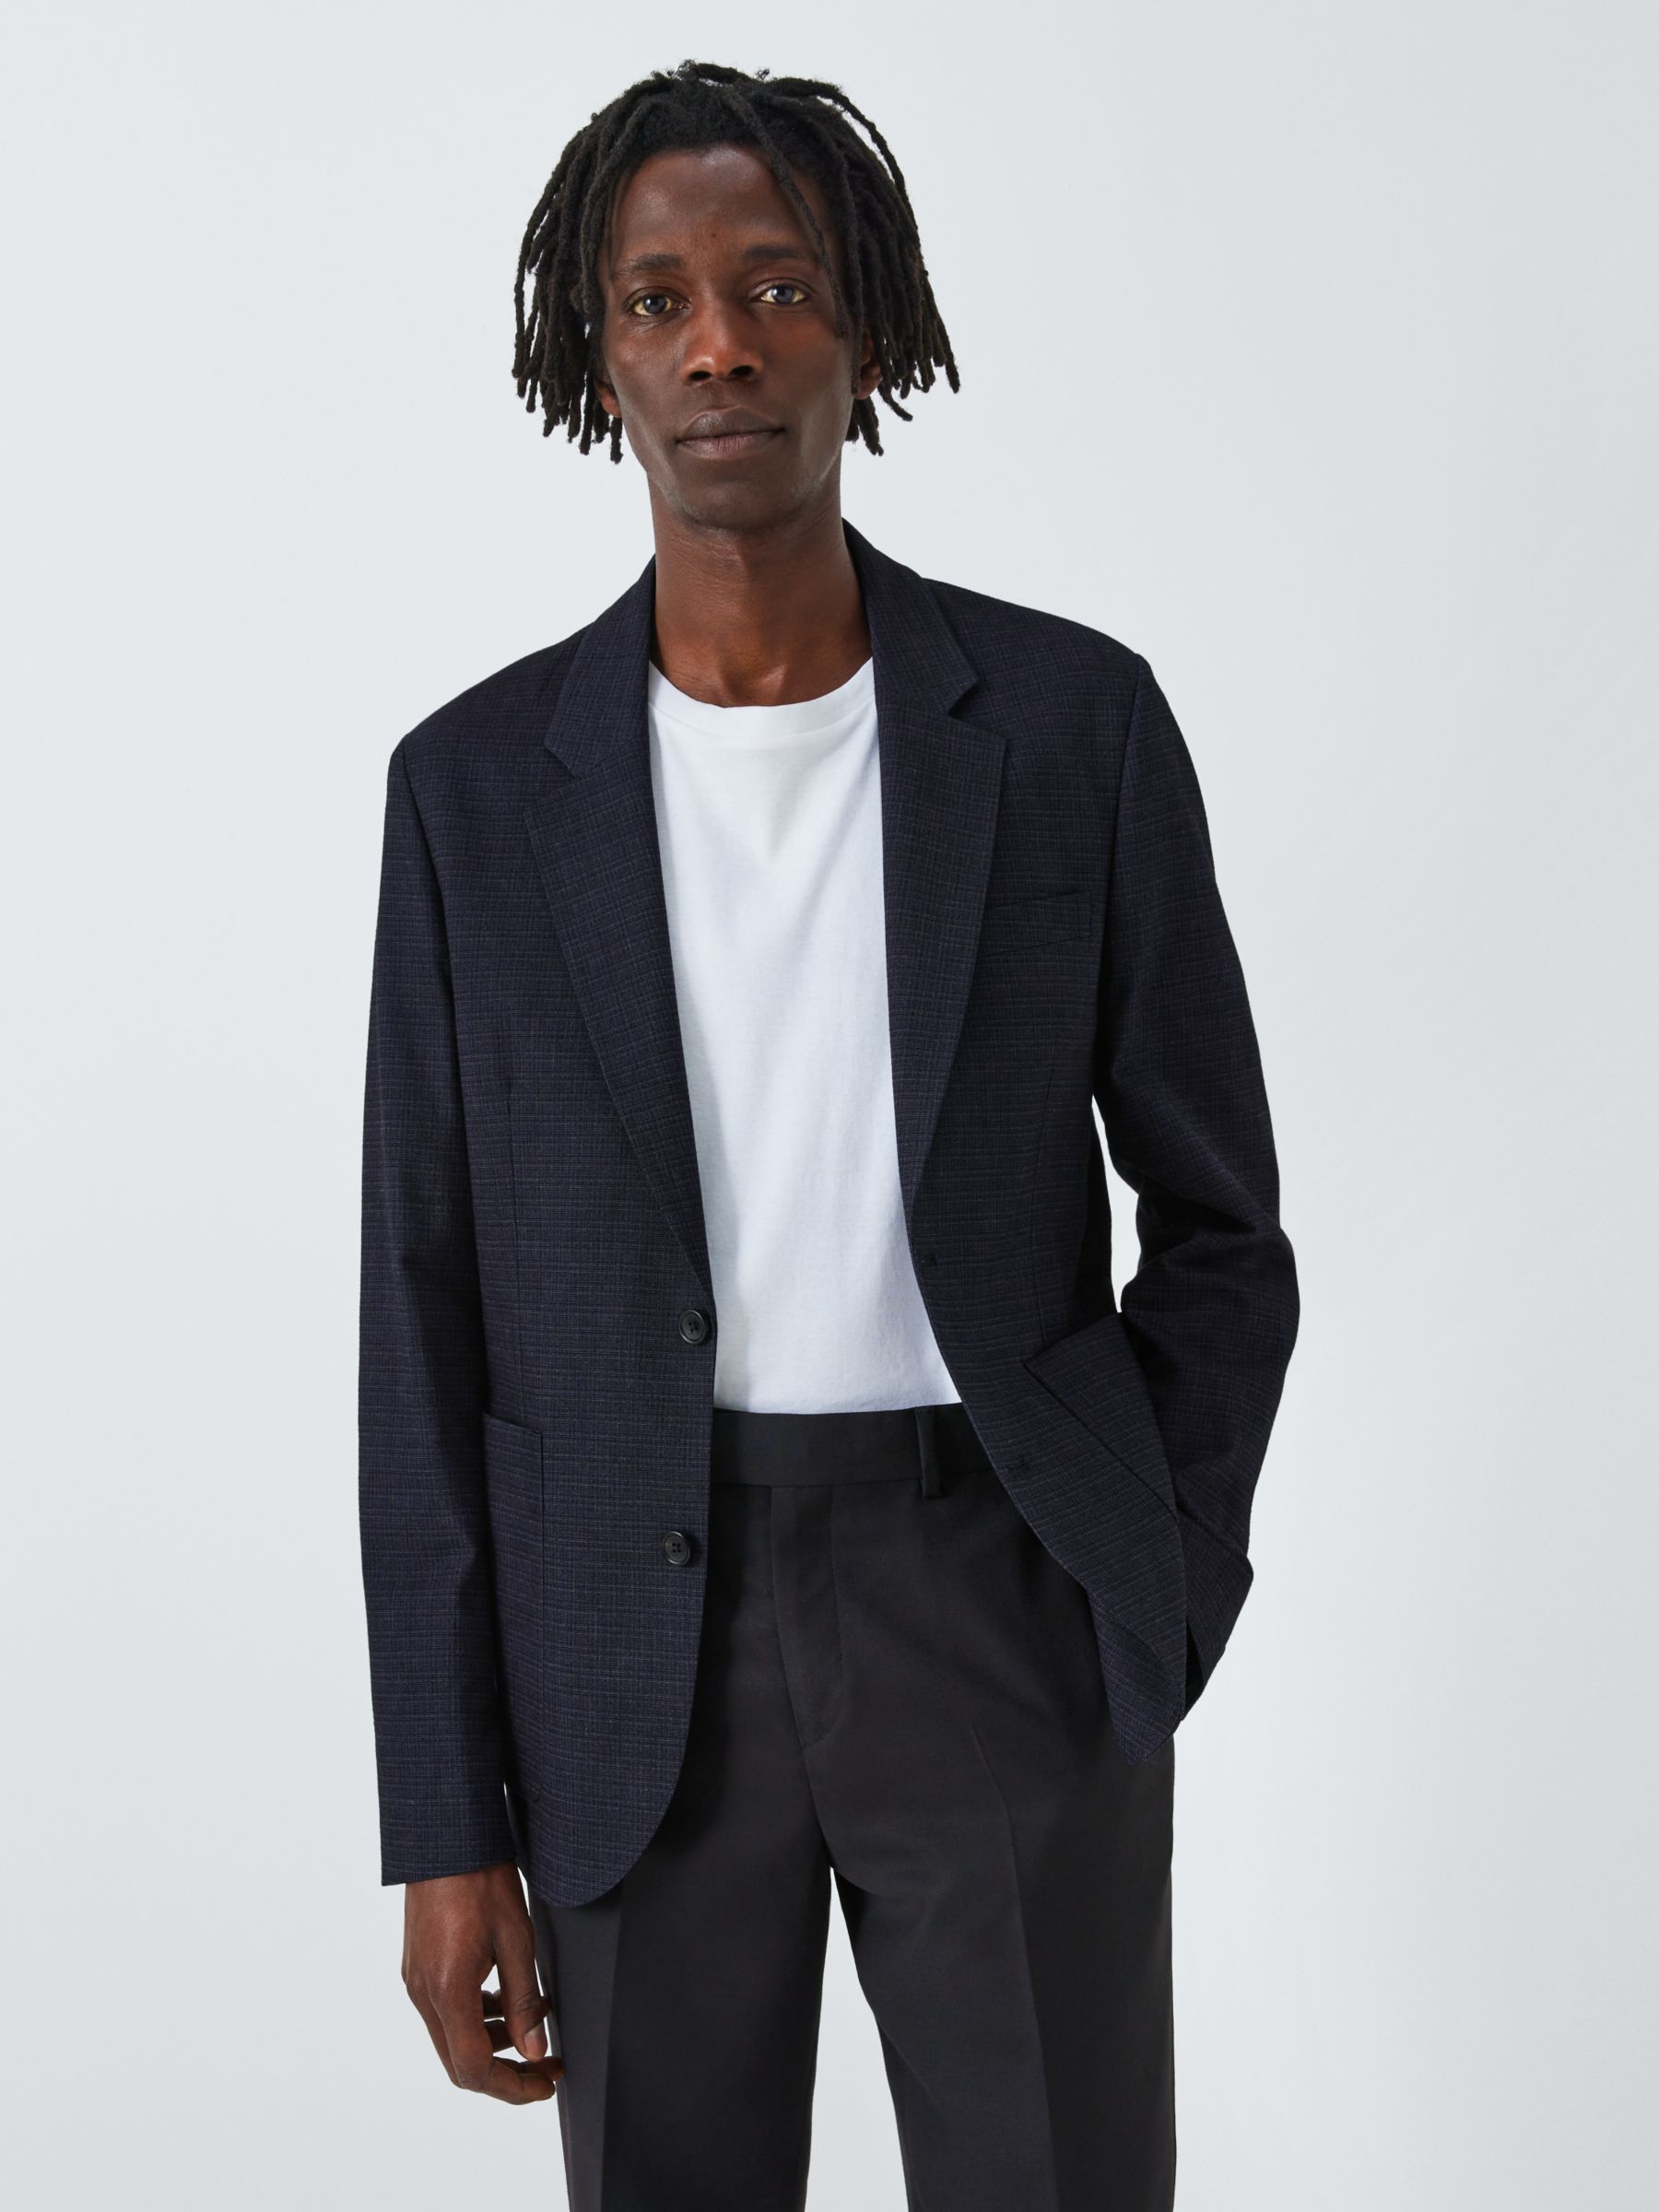 Buy Paul Smith Unlined Textured Suit Jacket, 49 Blues Online at johnlewis.com